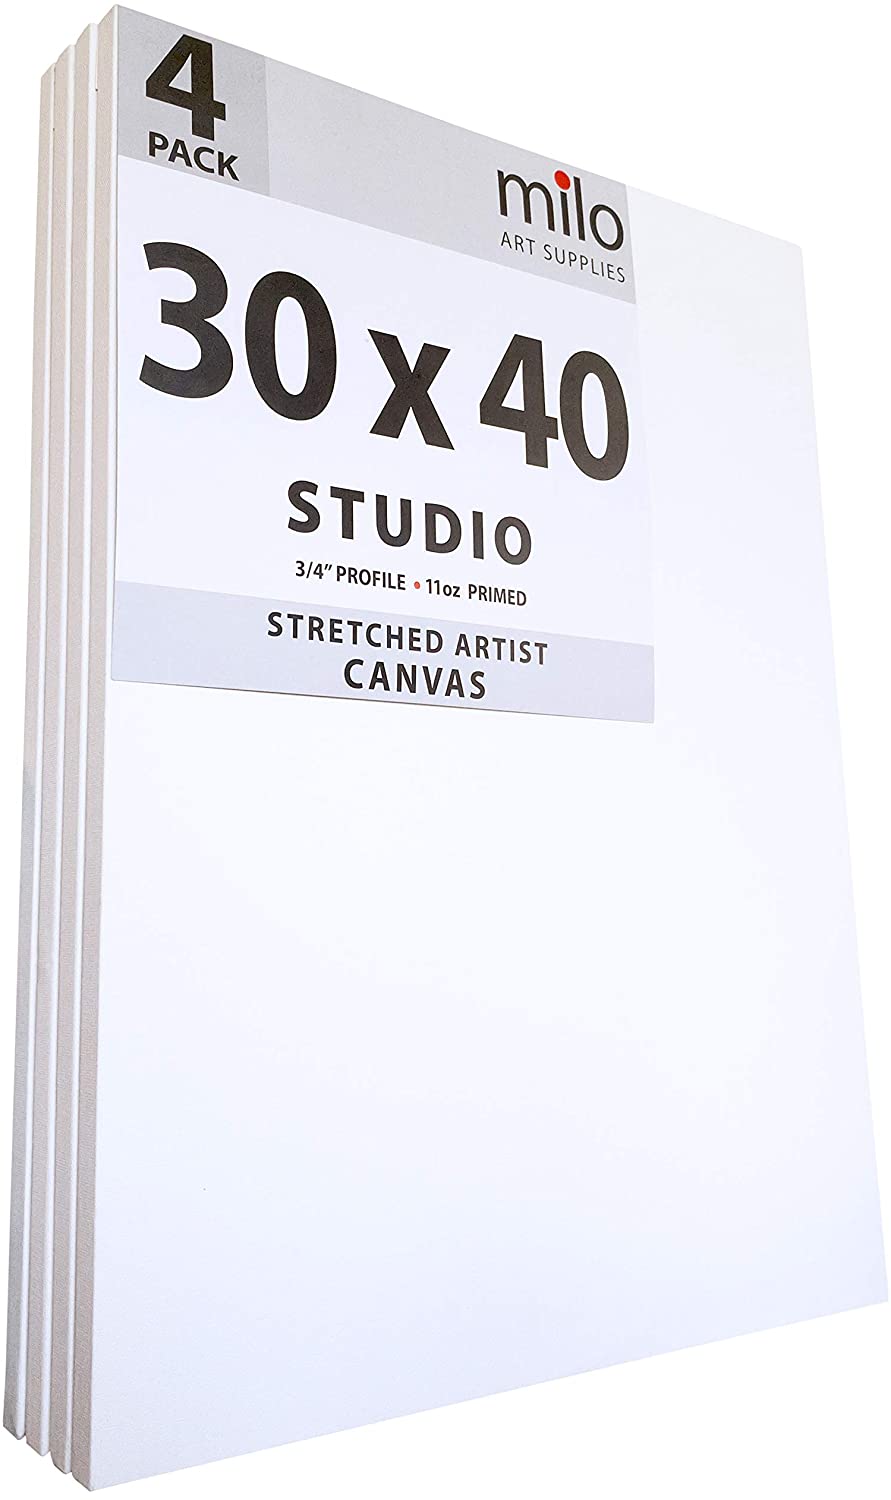 milo Pro Stretched Artist Canvas | 30x40 inches | Pack of 4 | 3/4 inch Studio Profile